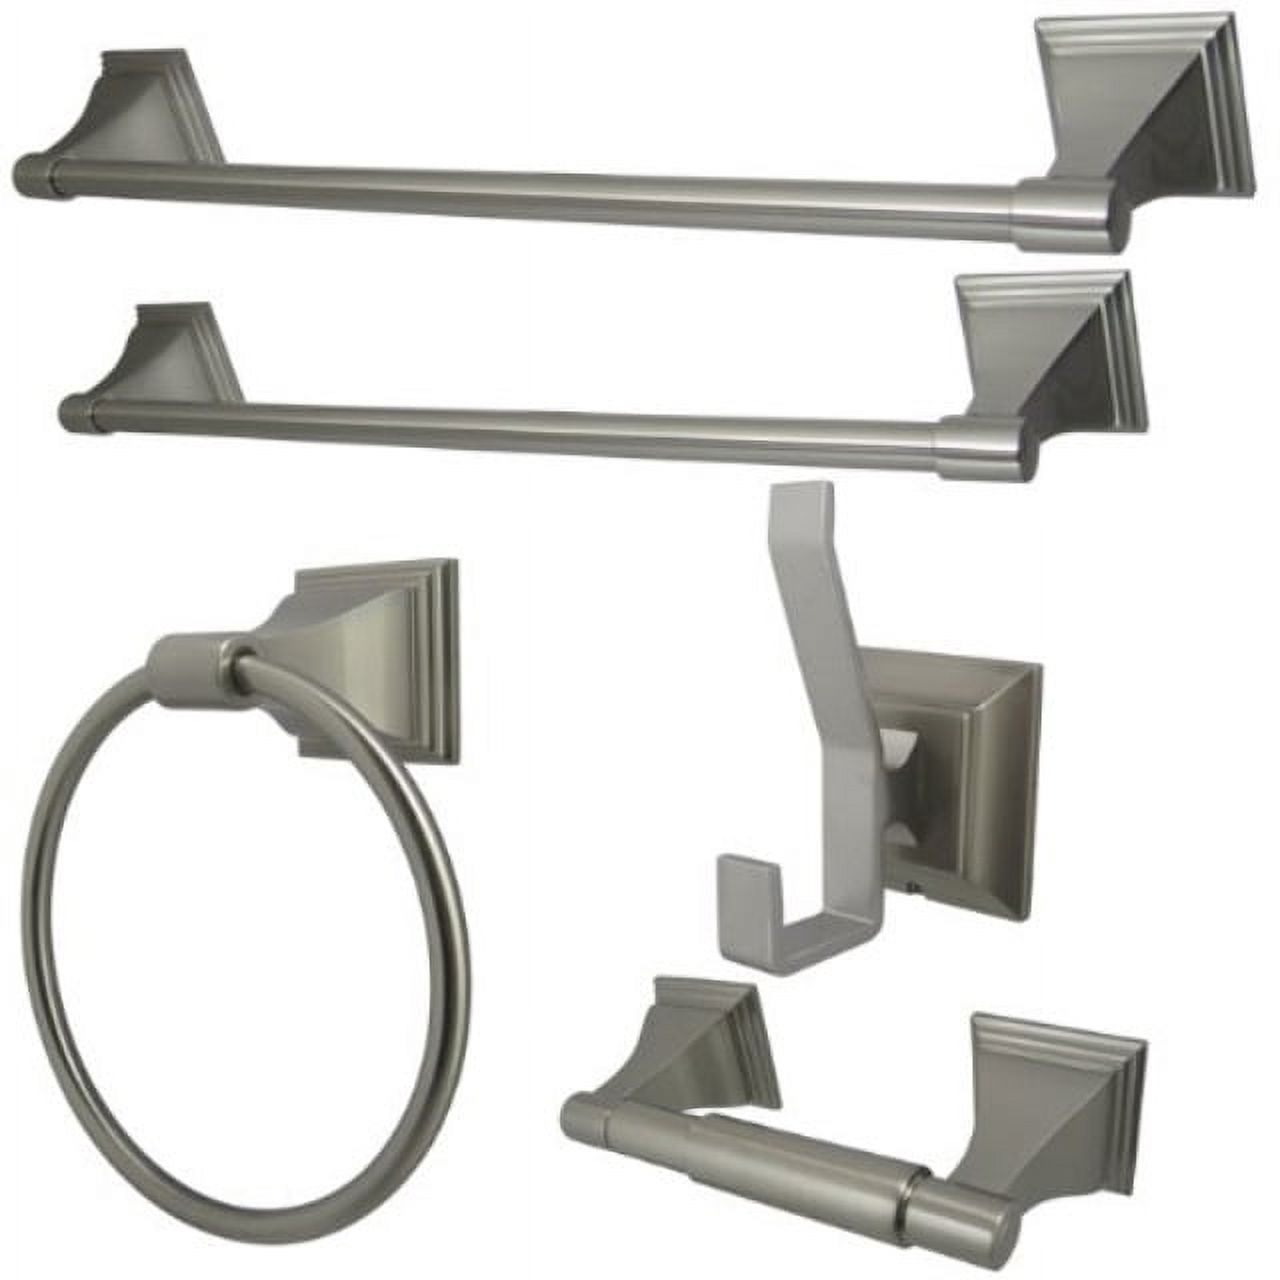 kingston brass bahk61212478sn 18-inch and 24-inch towel bar, 6-inch towel ring, toilet paper holder and robe hook monarch bathroom accessories, 5 piece in set, satin nickel - image 1 of 3